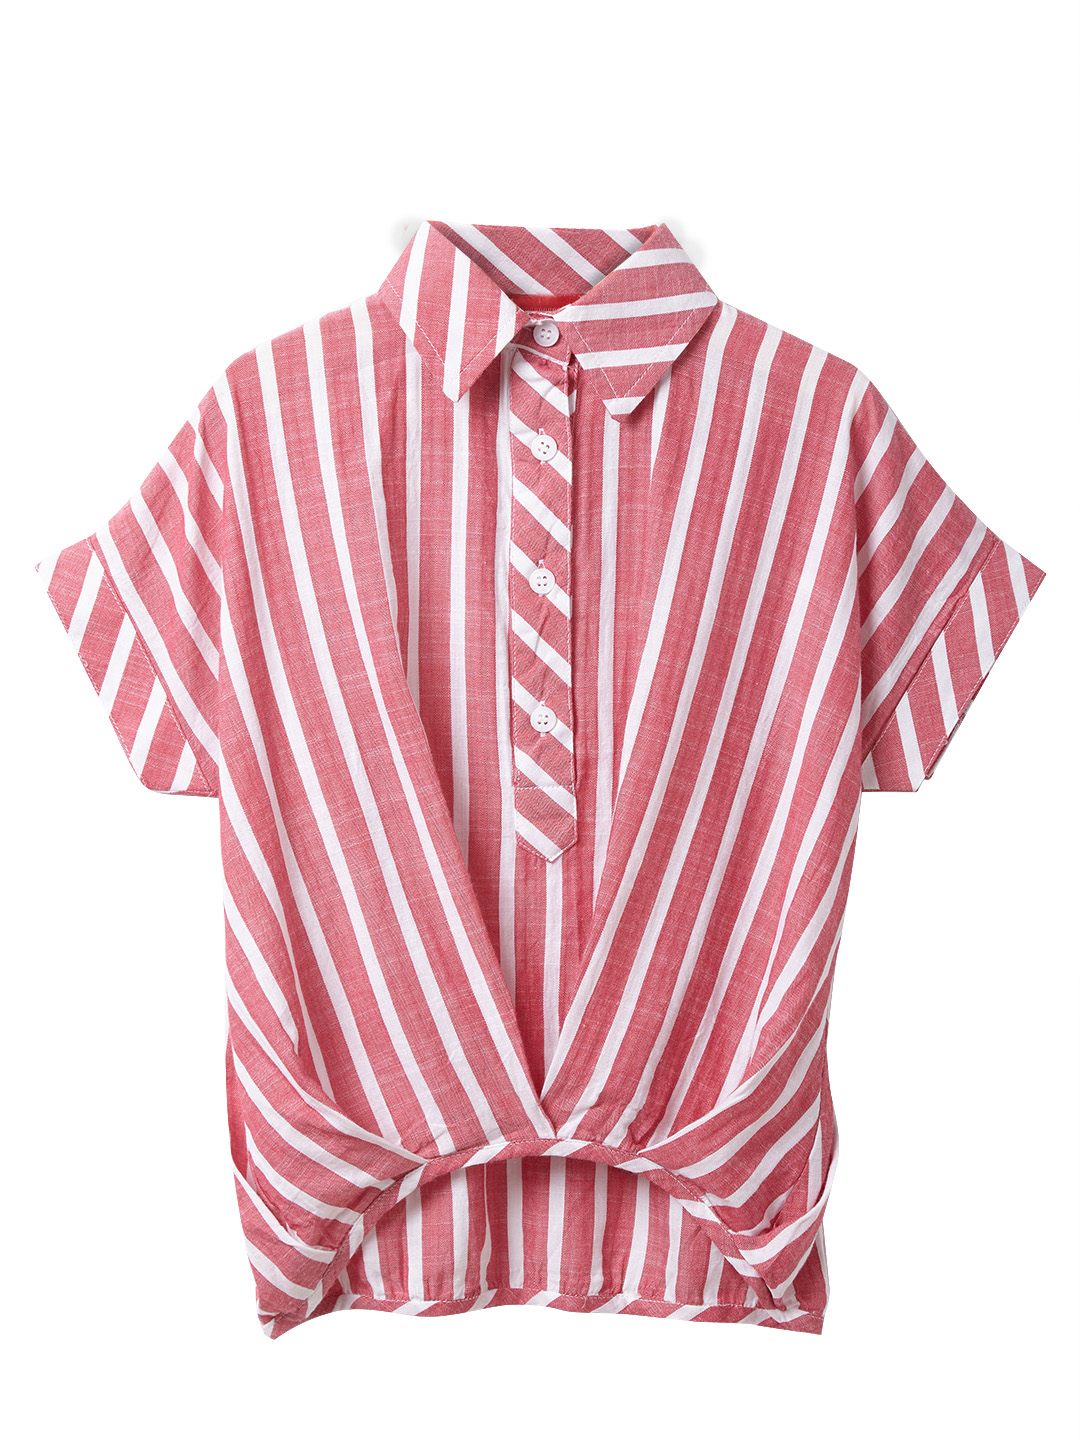 Red Stripe Fashion Woven Top for Girls Age 4 to 12 Years